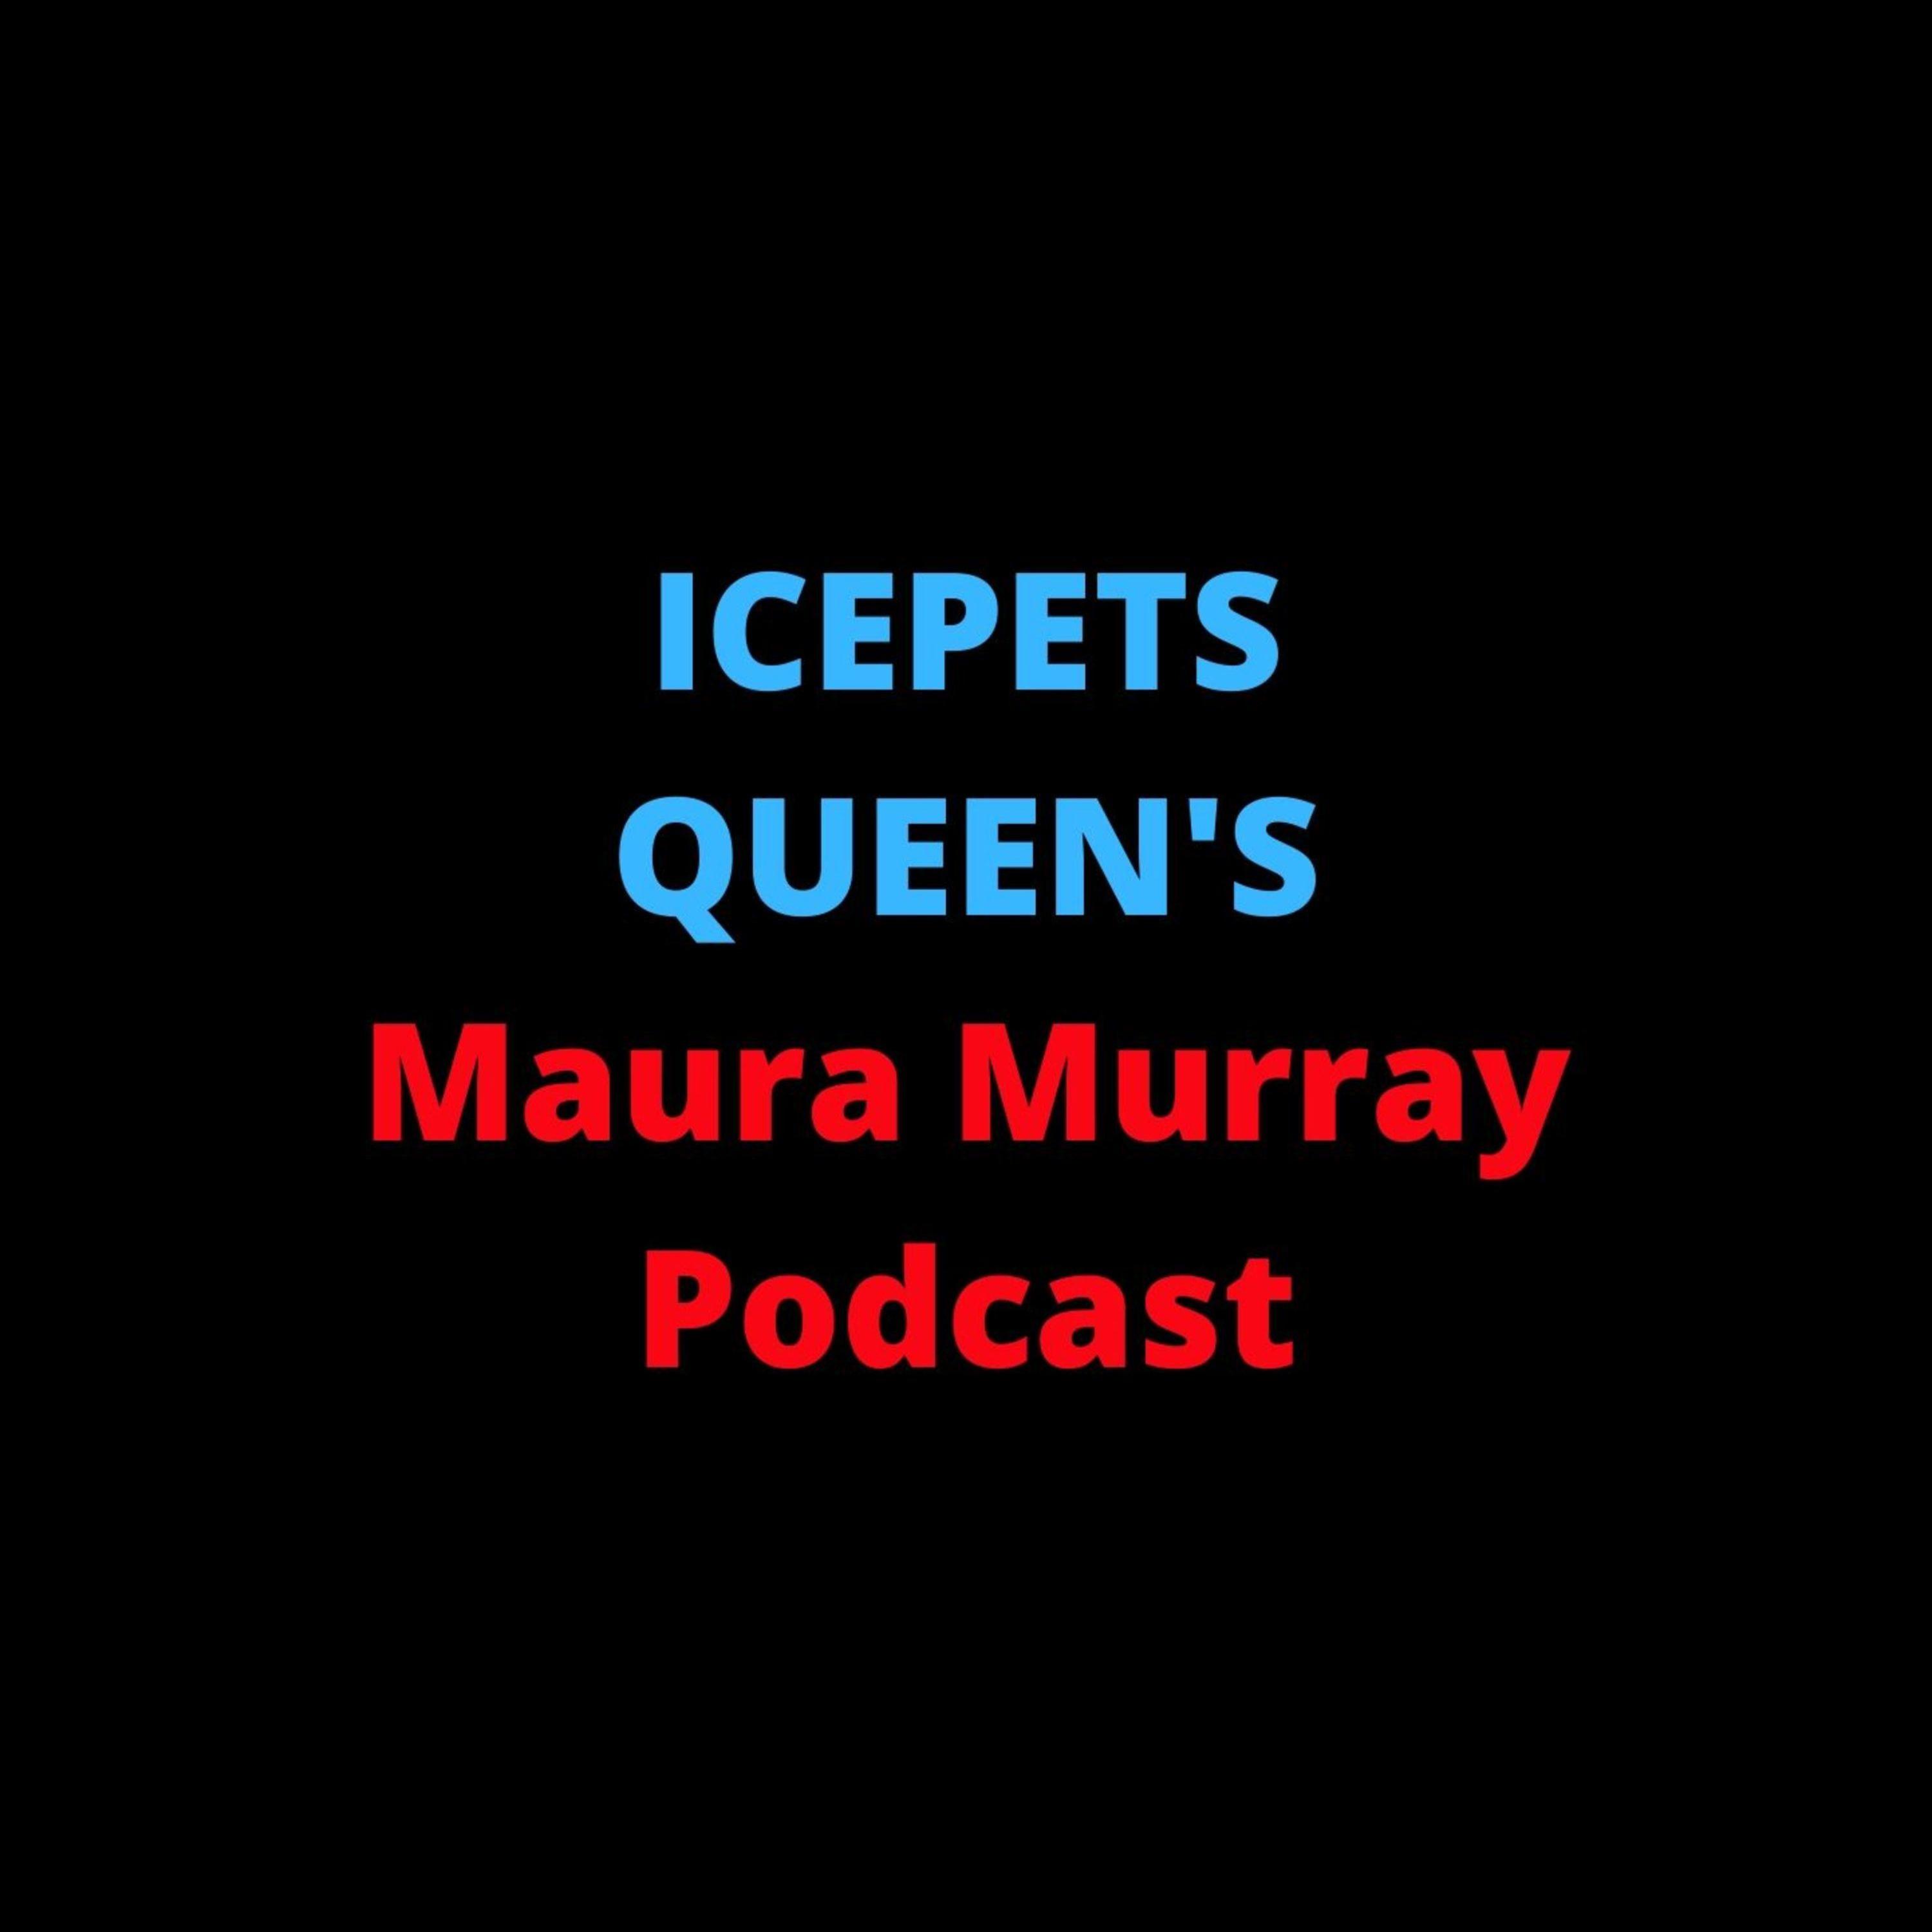 Icepets Queen's Maura Murray Podcast